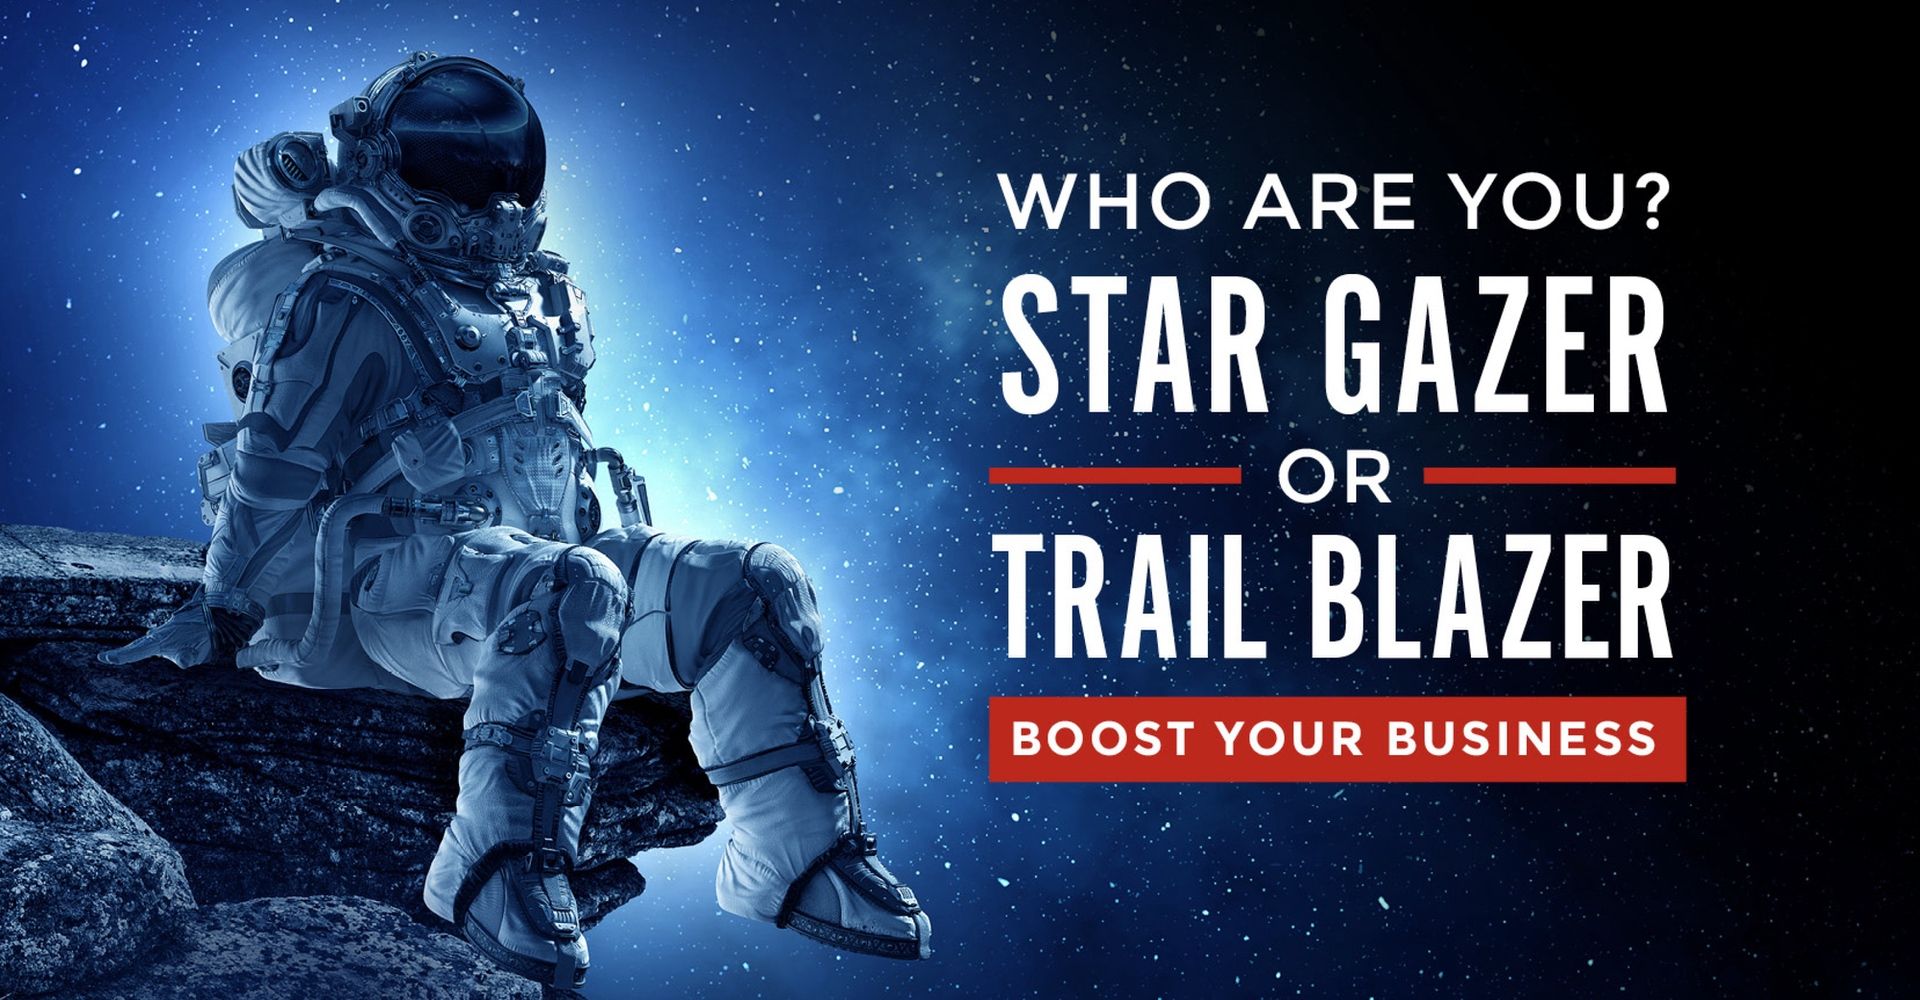 dark blue space background with person in spacesuit and wording "who are you? Stargazer or Trail Blazer. Boost your business.